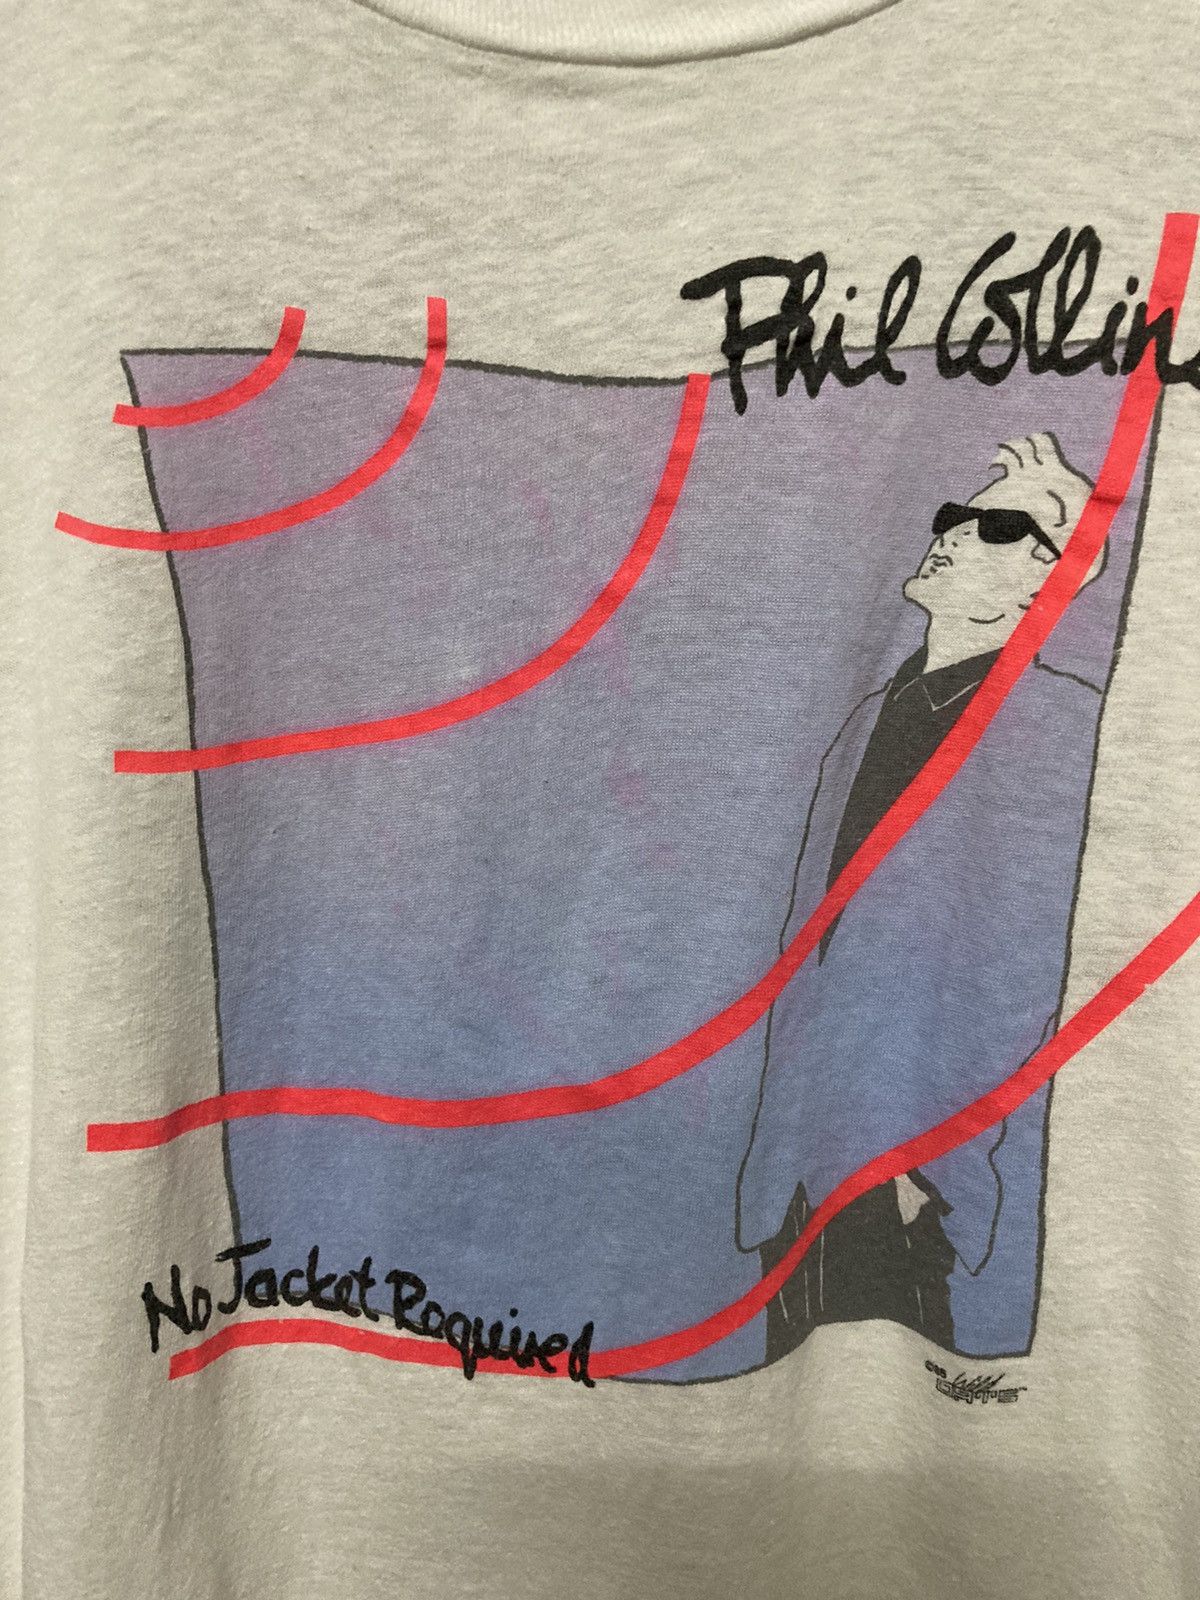 Vintage 1985 Phil Collins No Jacket Required Tour Tshirt - 5